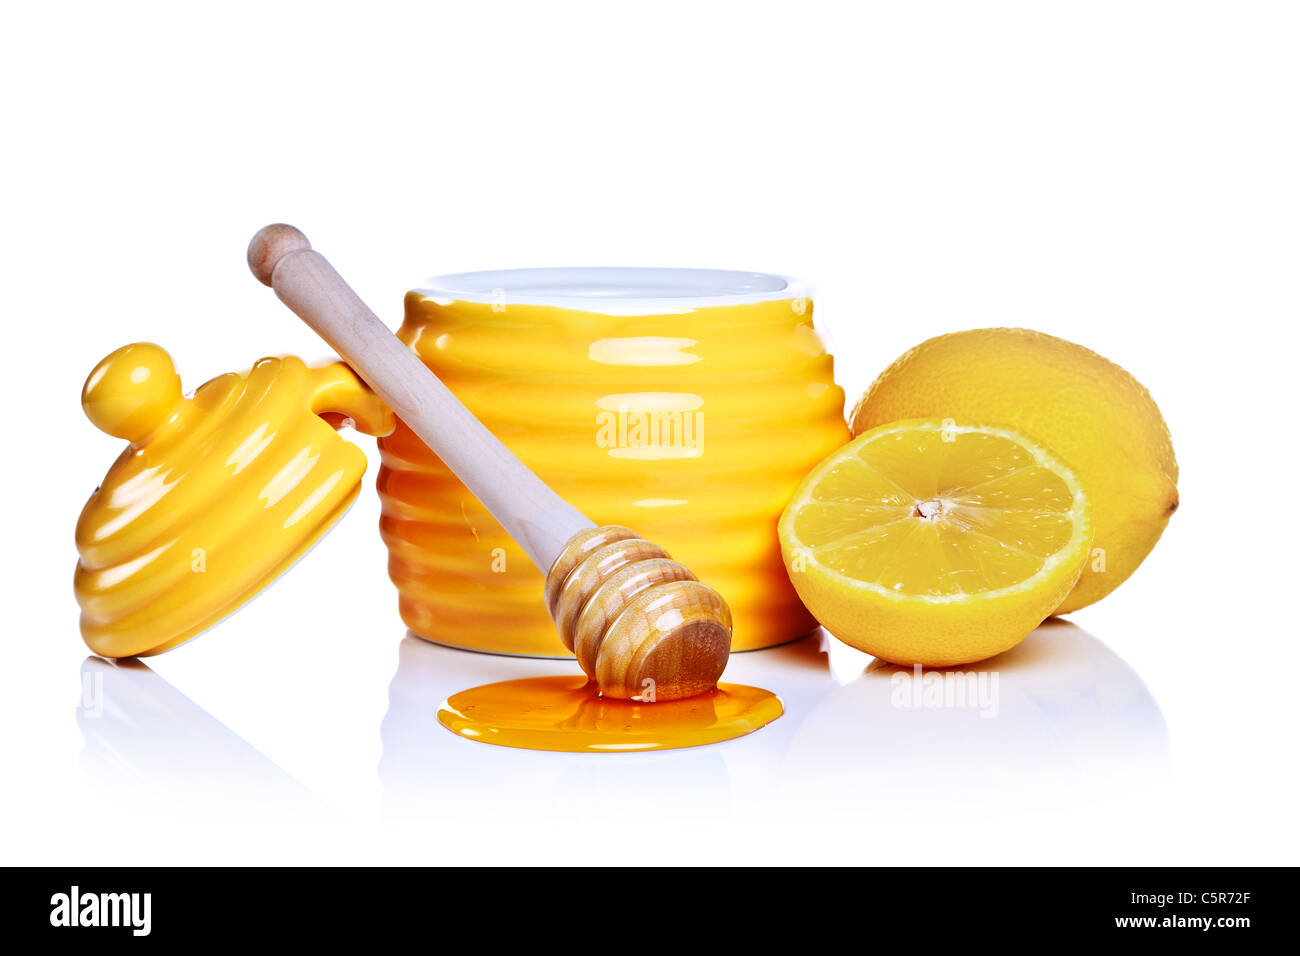 Photo of a beehive shaped honey pot with dipper and lemon isolated on a white background. Stock Photo